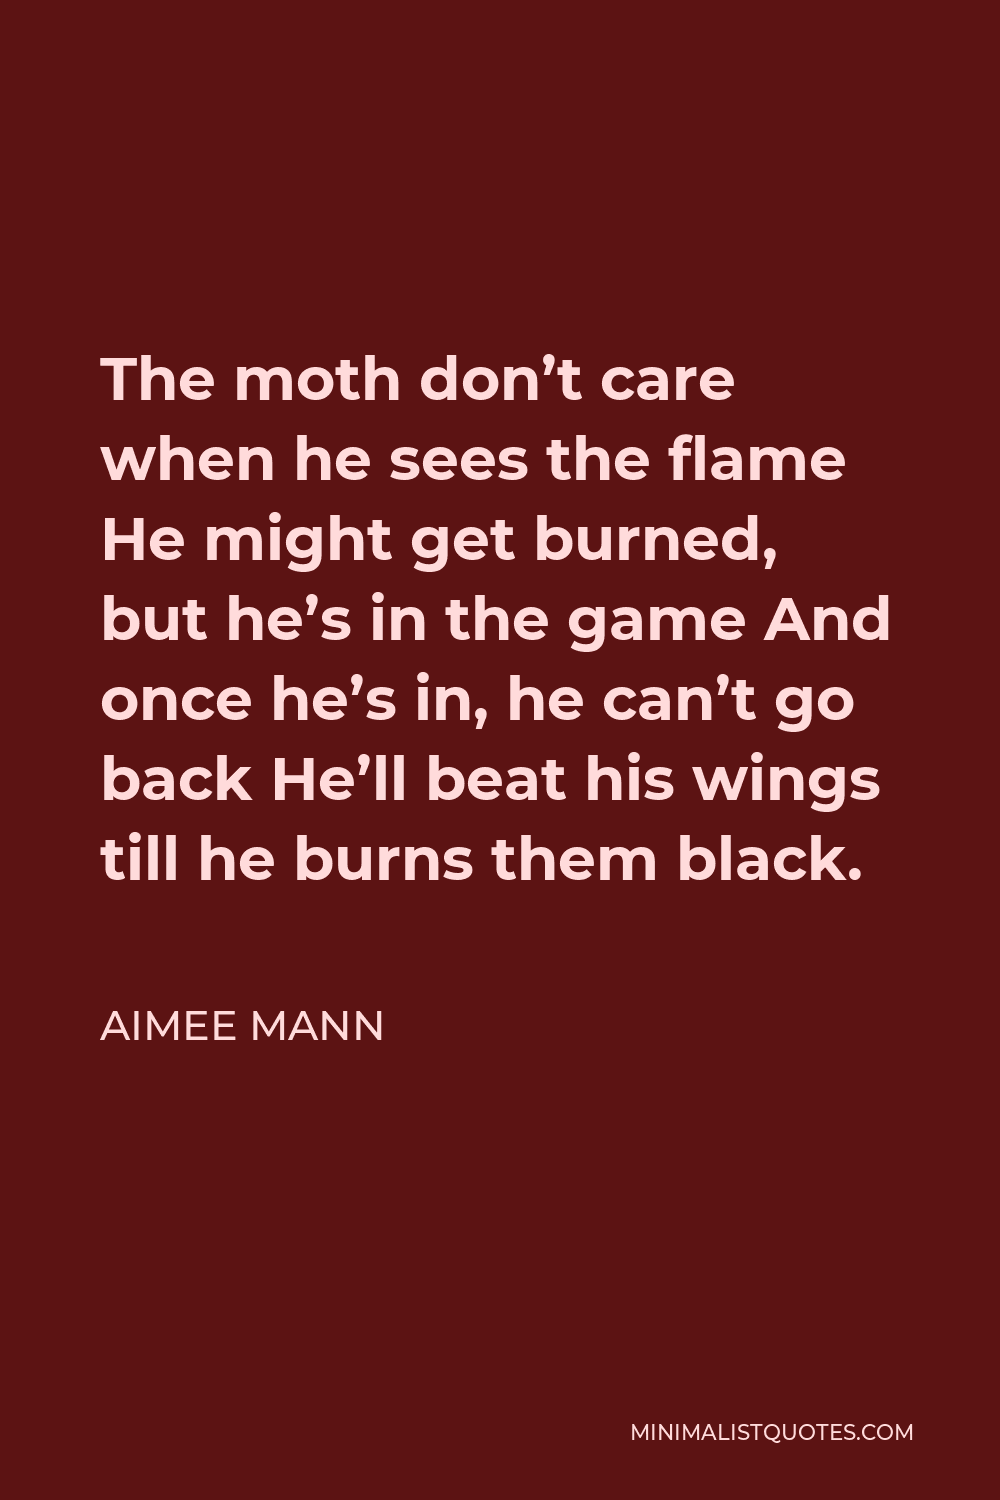 Aimee Mann Quote - The moth don’t care when he sees the flame He might get burned, but he’s in the game And once he’s in, he can’t go back He’ll beat his wings till he burns them black.